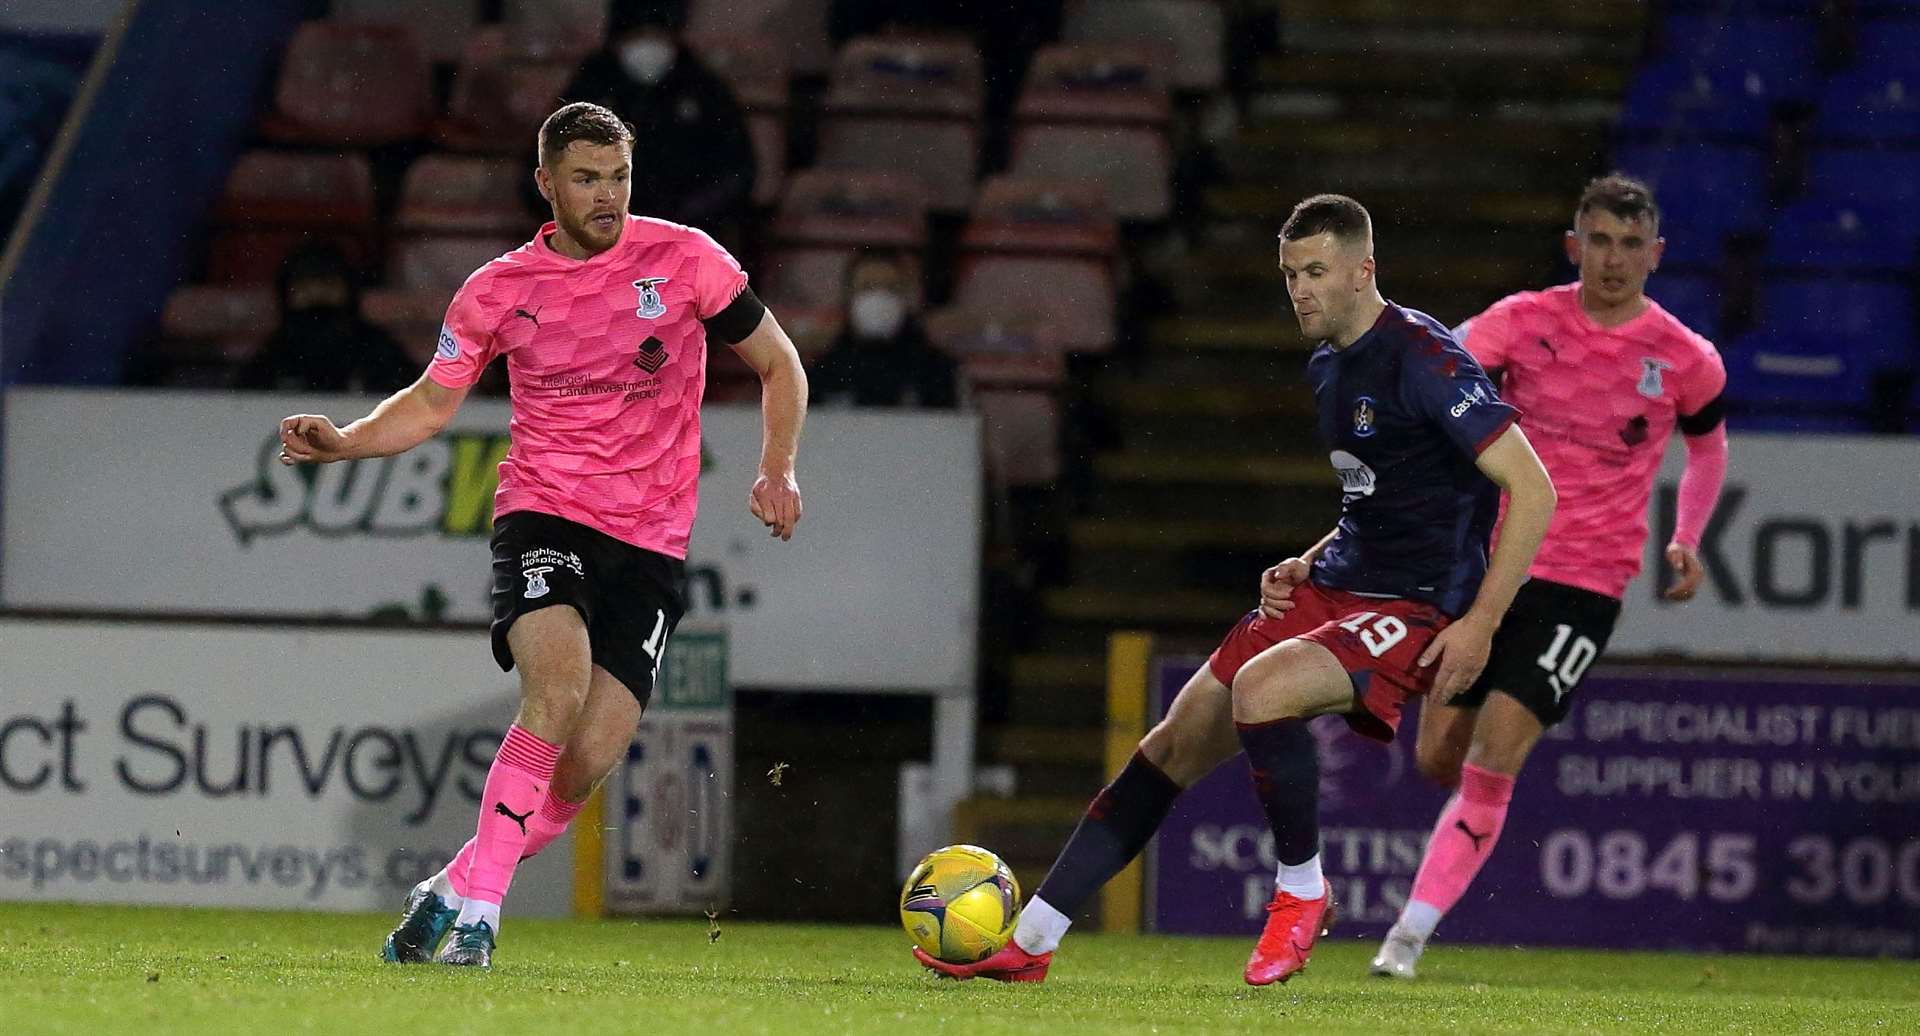 Liam Polworth in action for Kilmarnock against Inverness earlier this season.